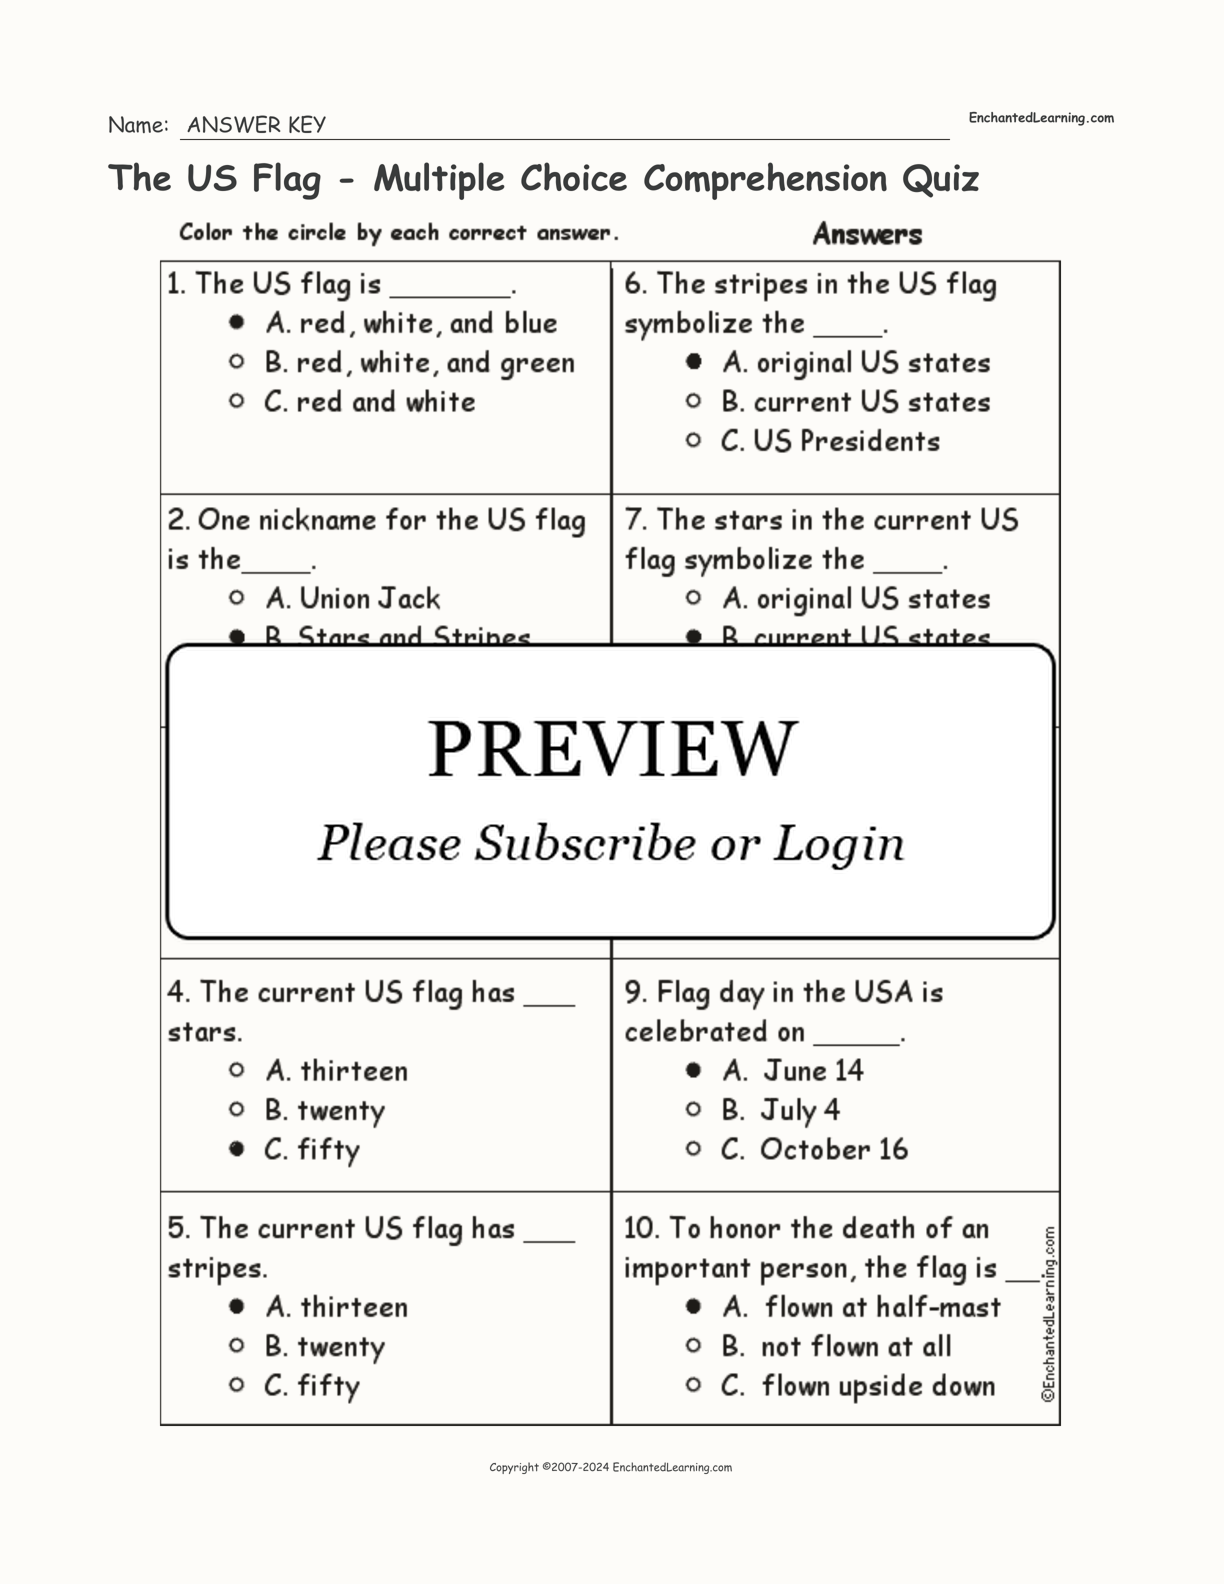 The US Flag - Multiple Choice Comprehension Quiz interactive worksheet page 2